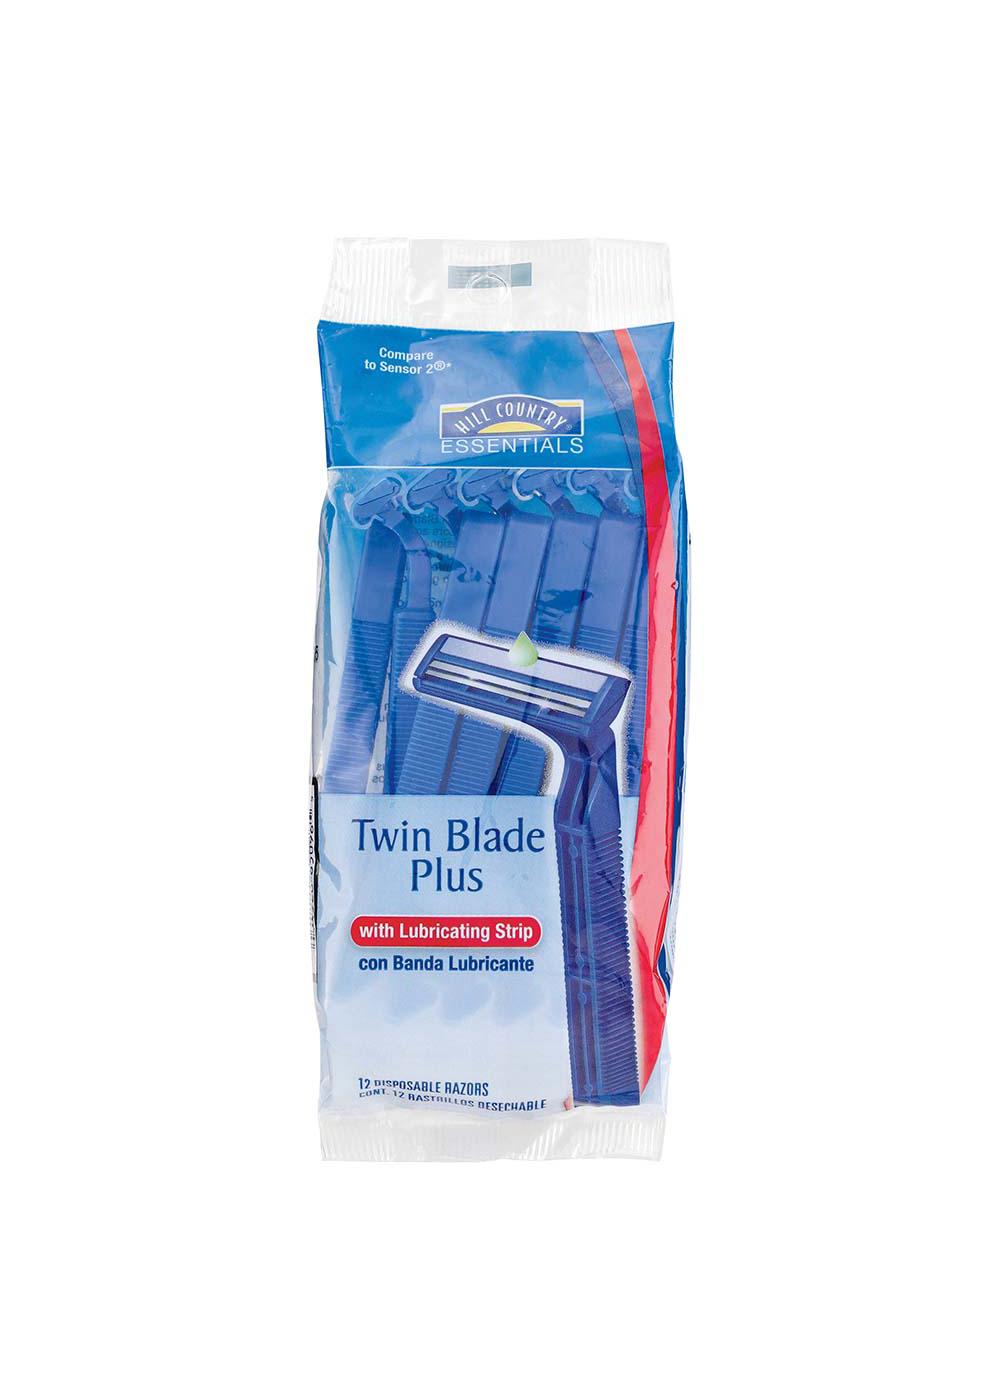 Hill Country Essentials Men's Twin Blade Plus with Lubricating Strip Razors; image 1 of 4